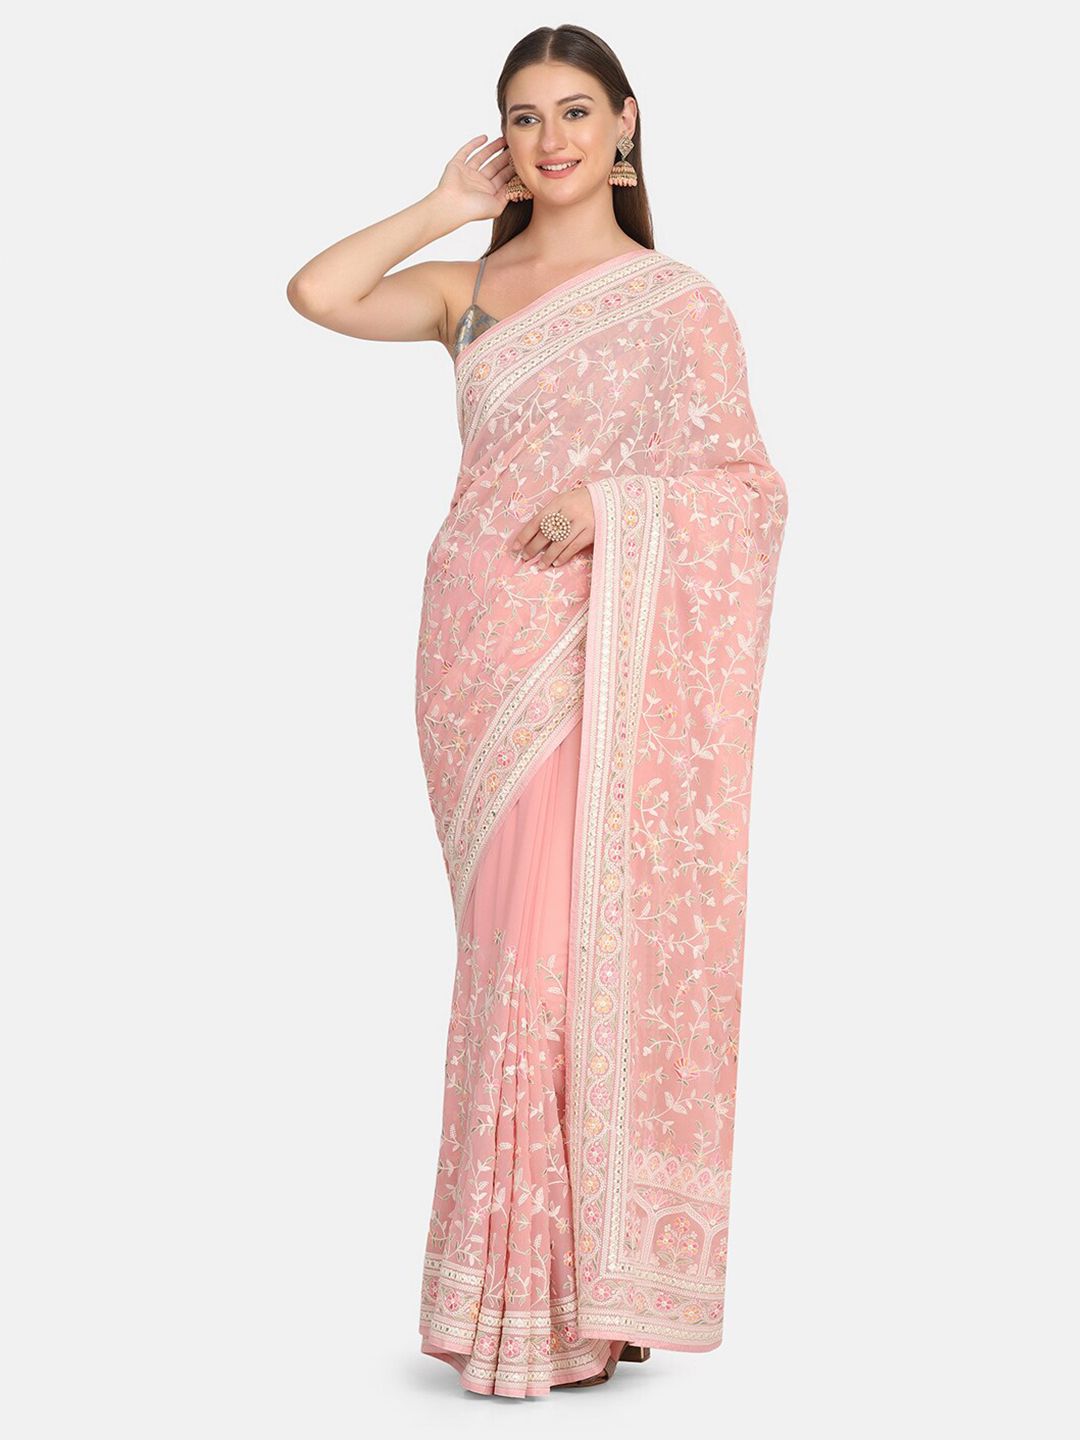 BOMBAY SELECTIONS Peach-Coloured & Green Kalamkari Embroidered Pure Georgette Saree Price in India